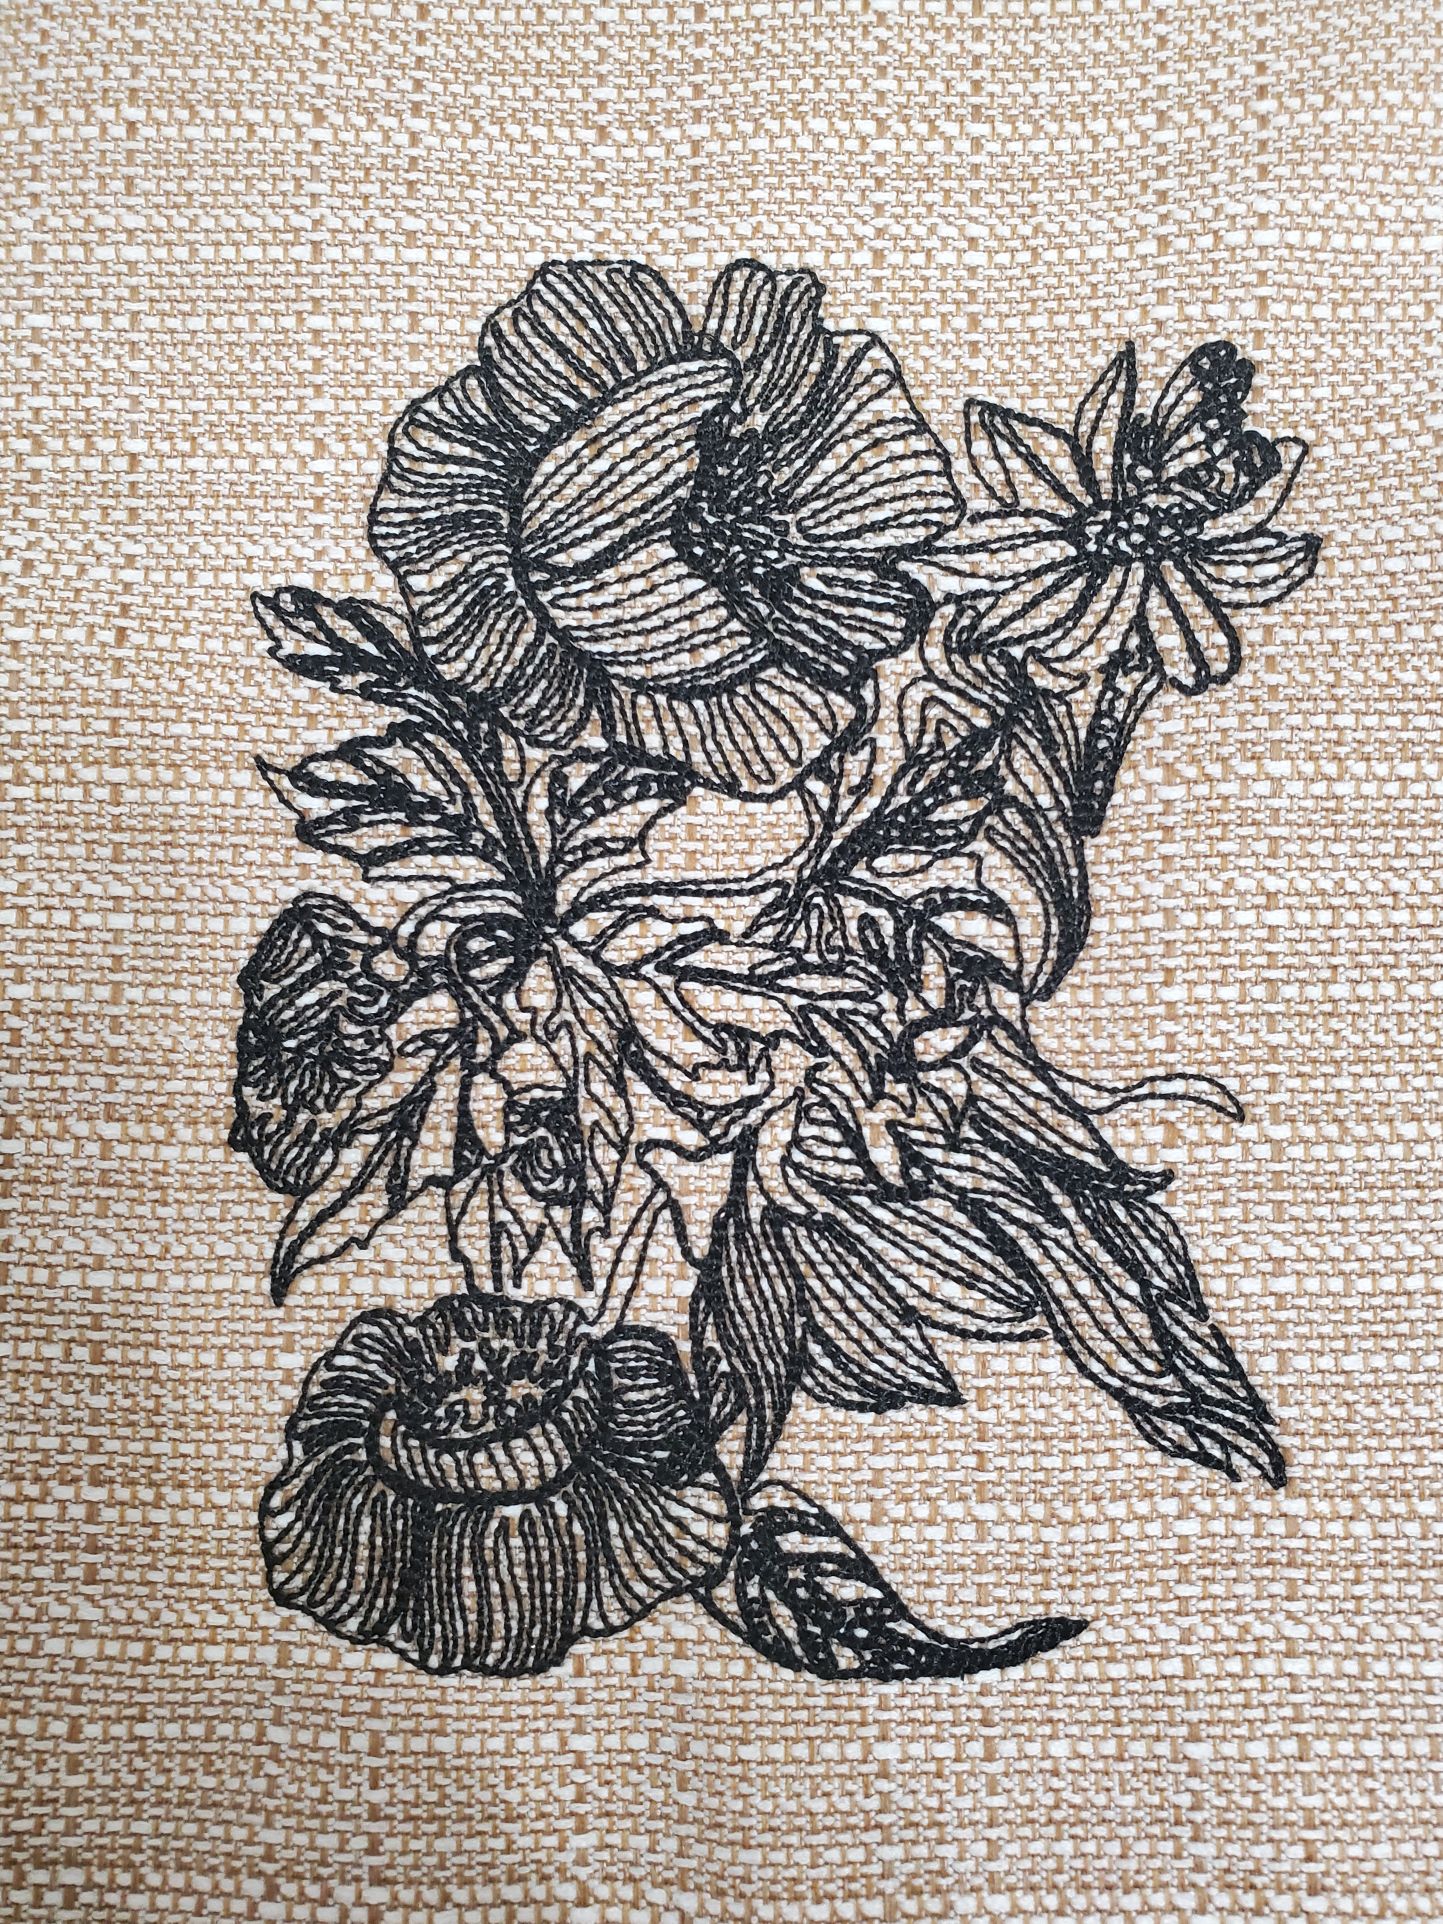 Floral-2-AcuSketch-oversized-embroidery-Jennifer-Wheatley-Wolf